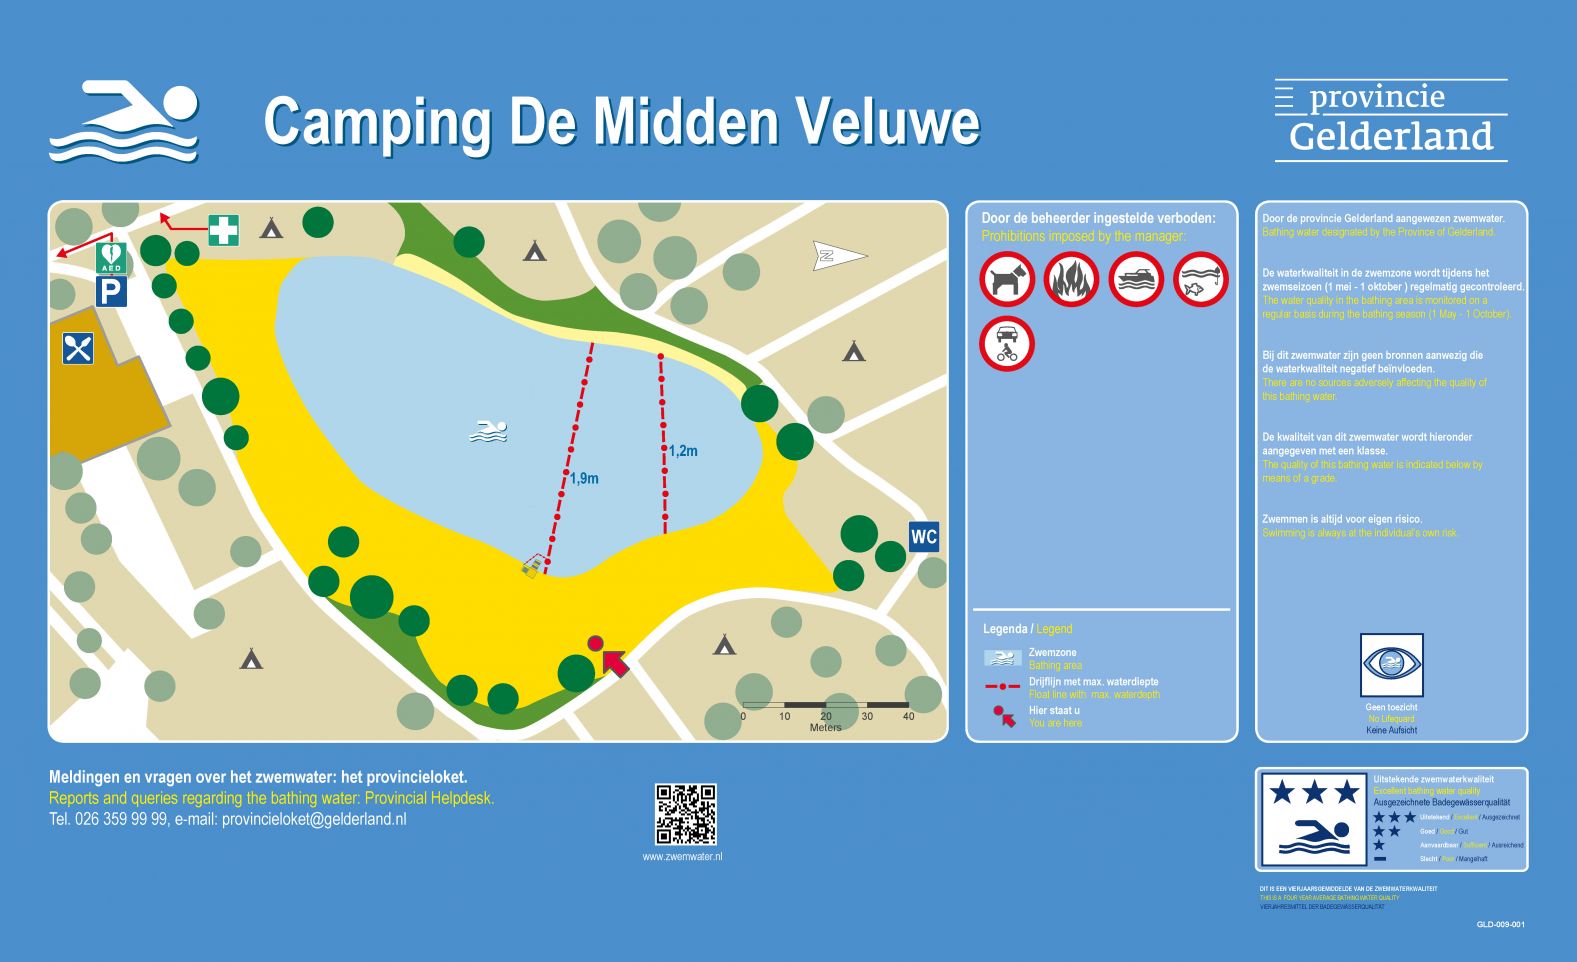 The information board at the swimming location Camping De Midden Veluwe